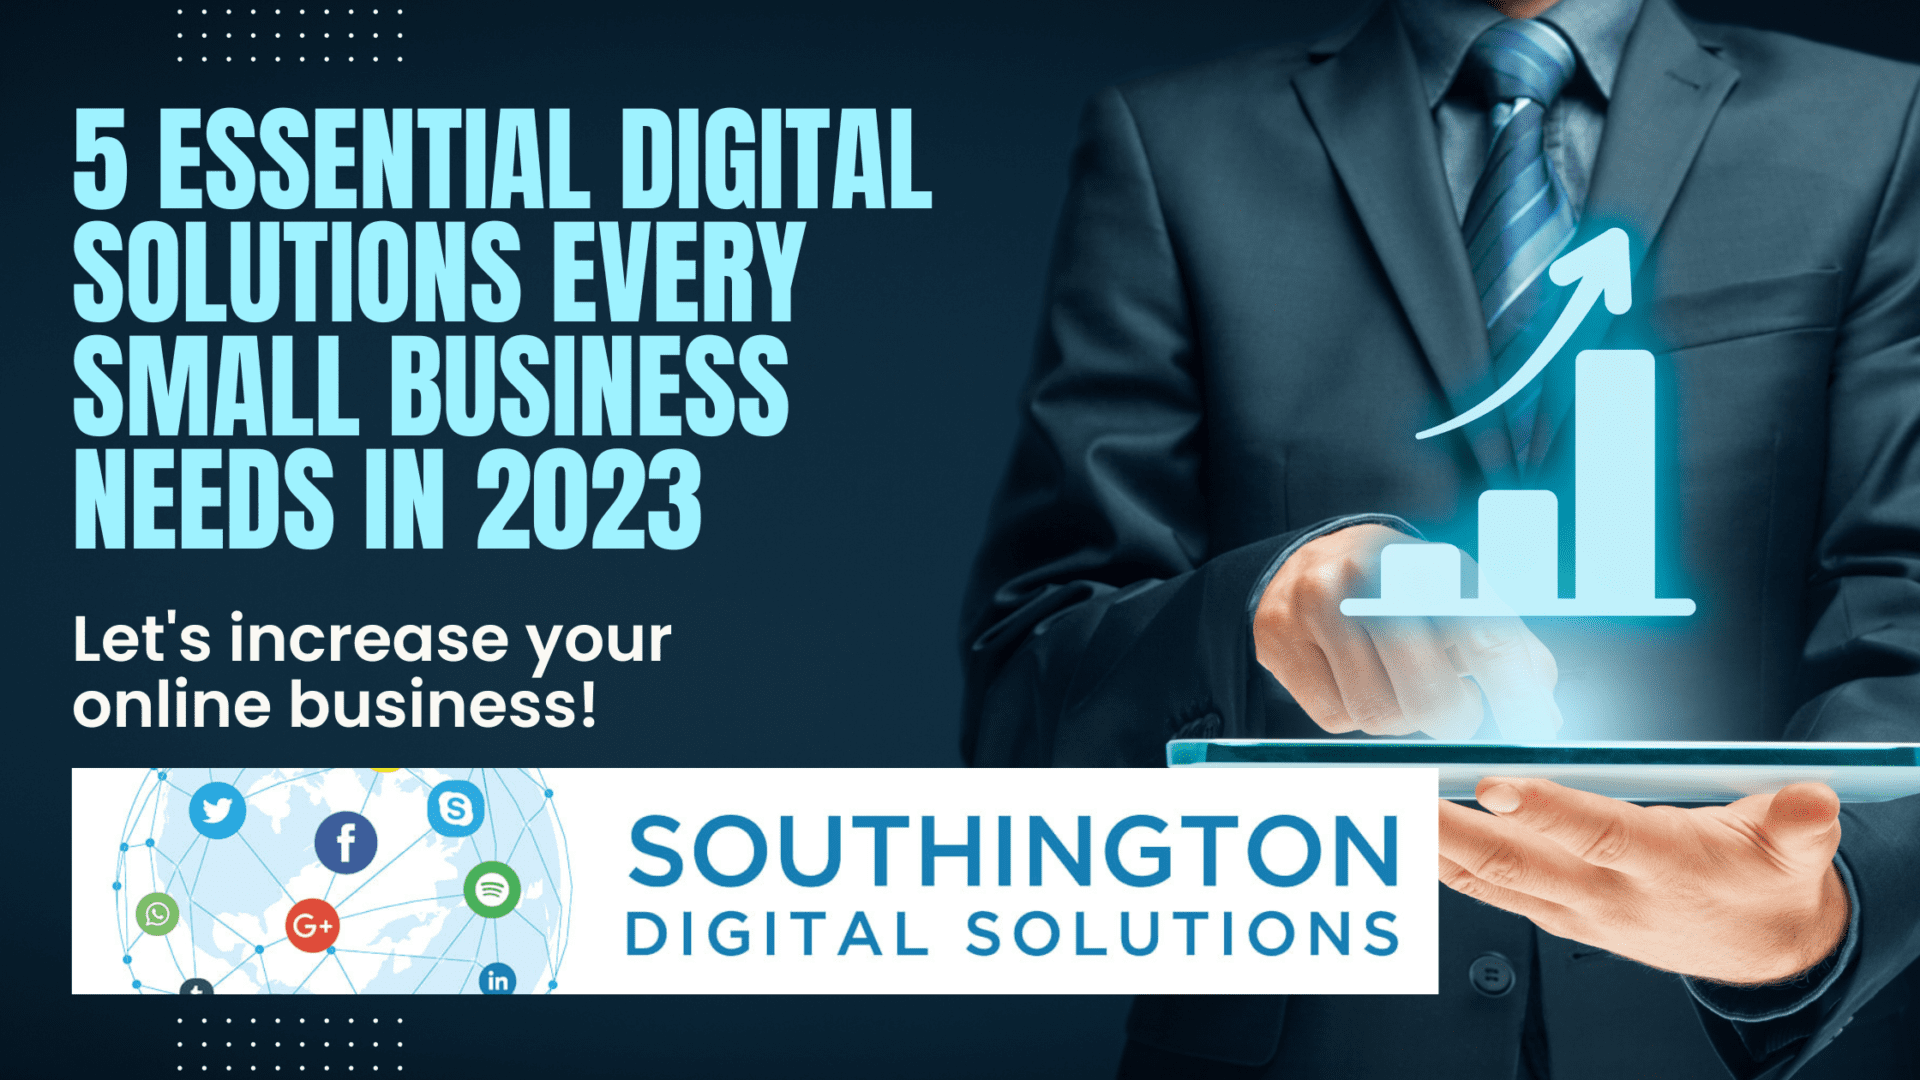 SMBs Digital Solutions 2023